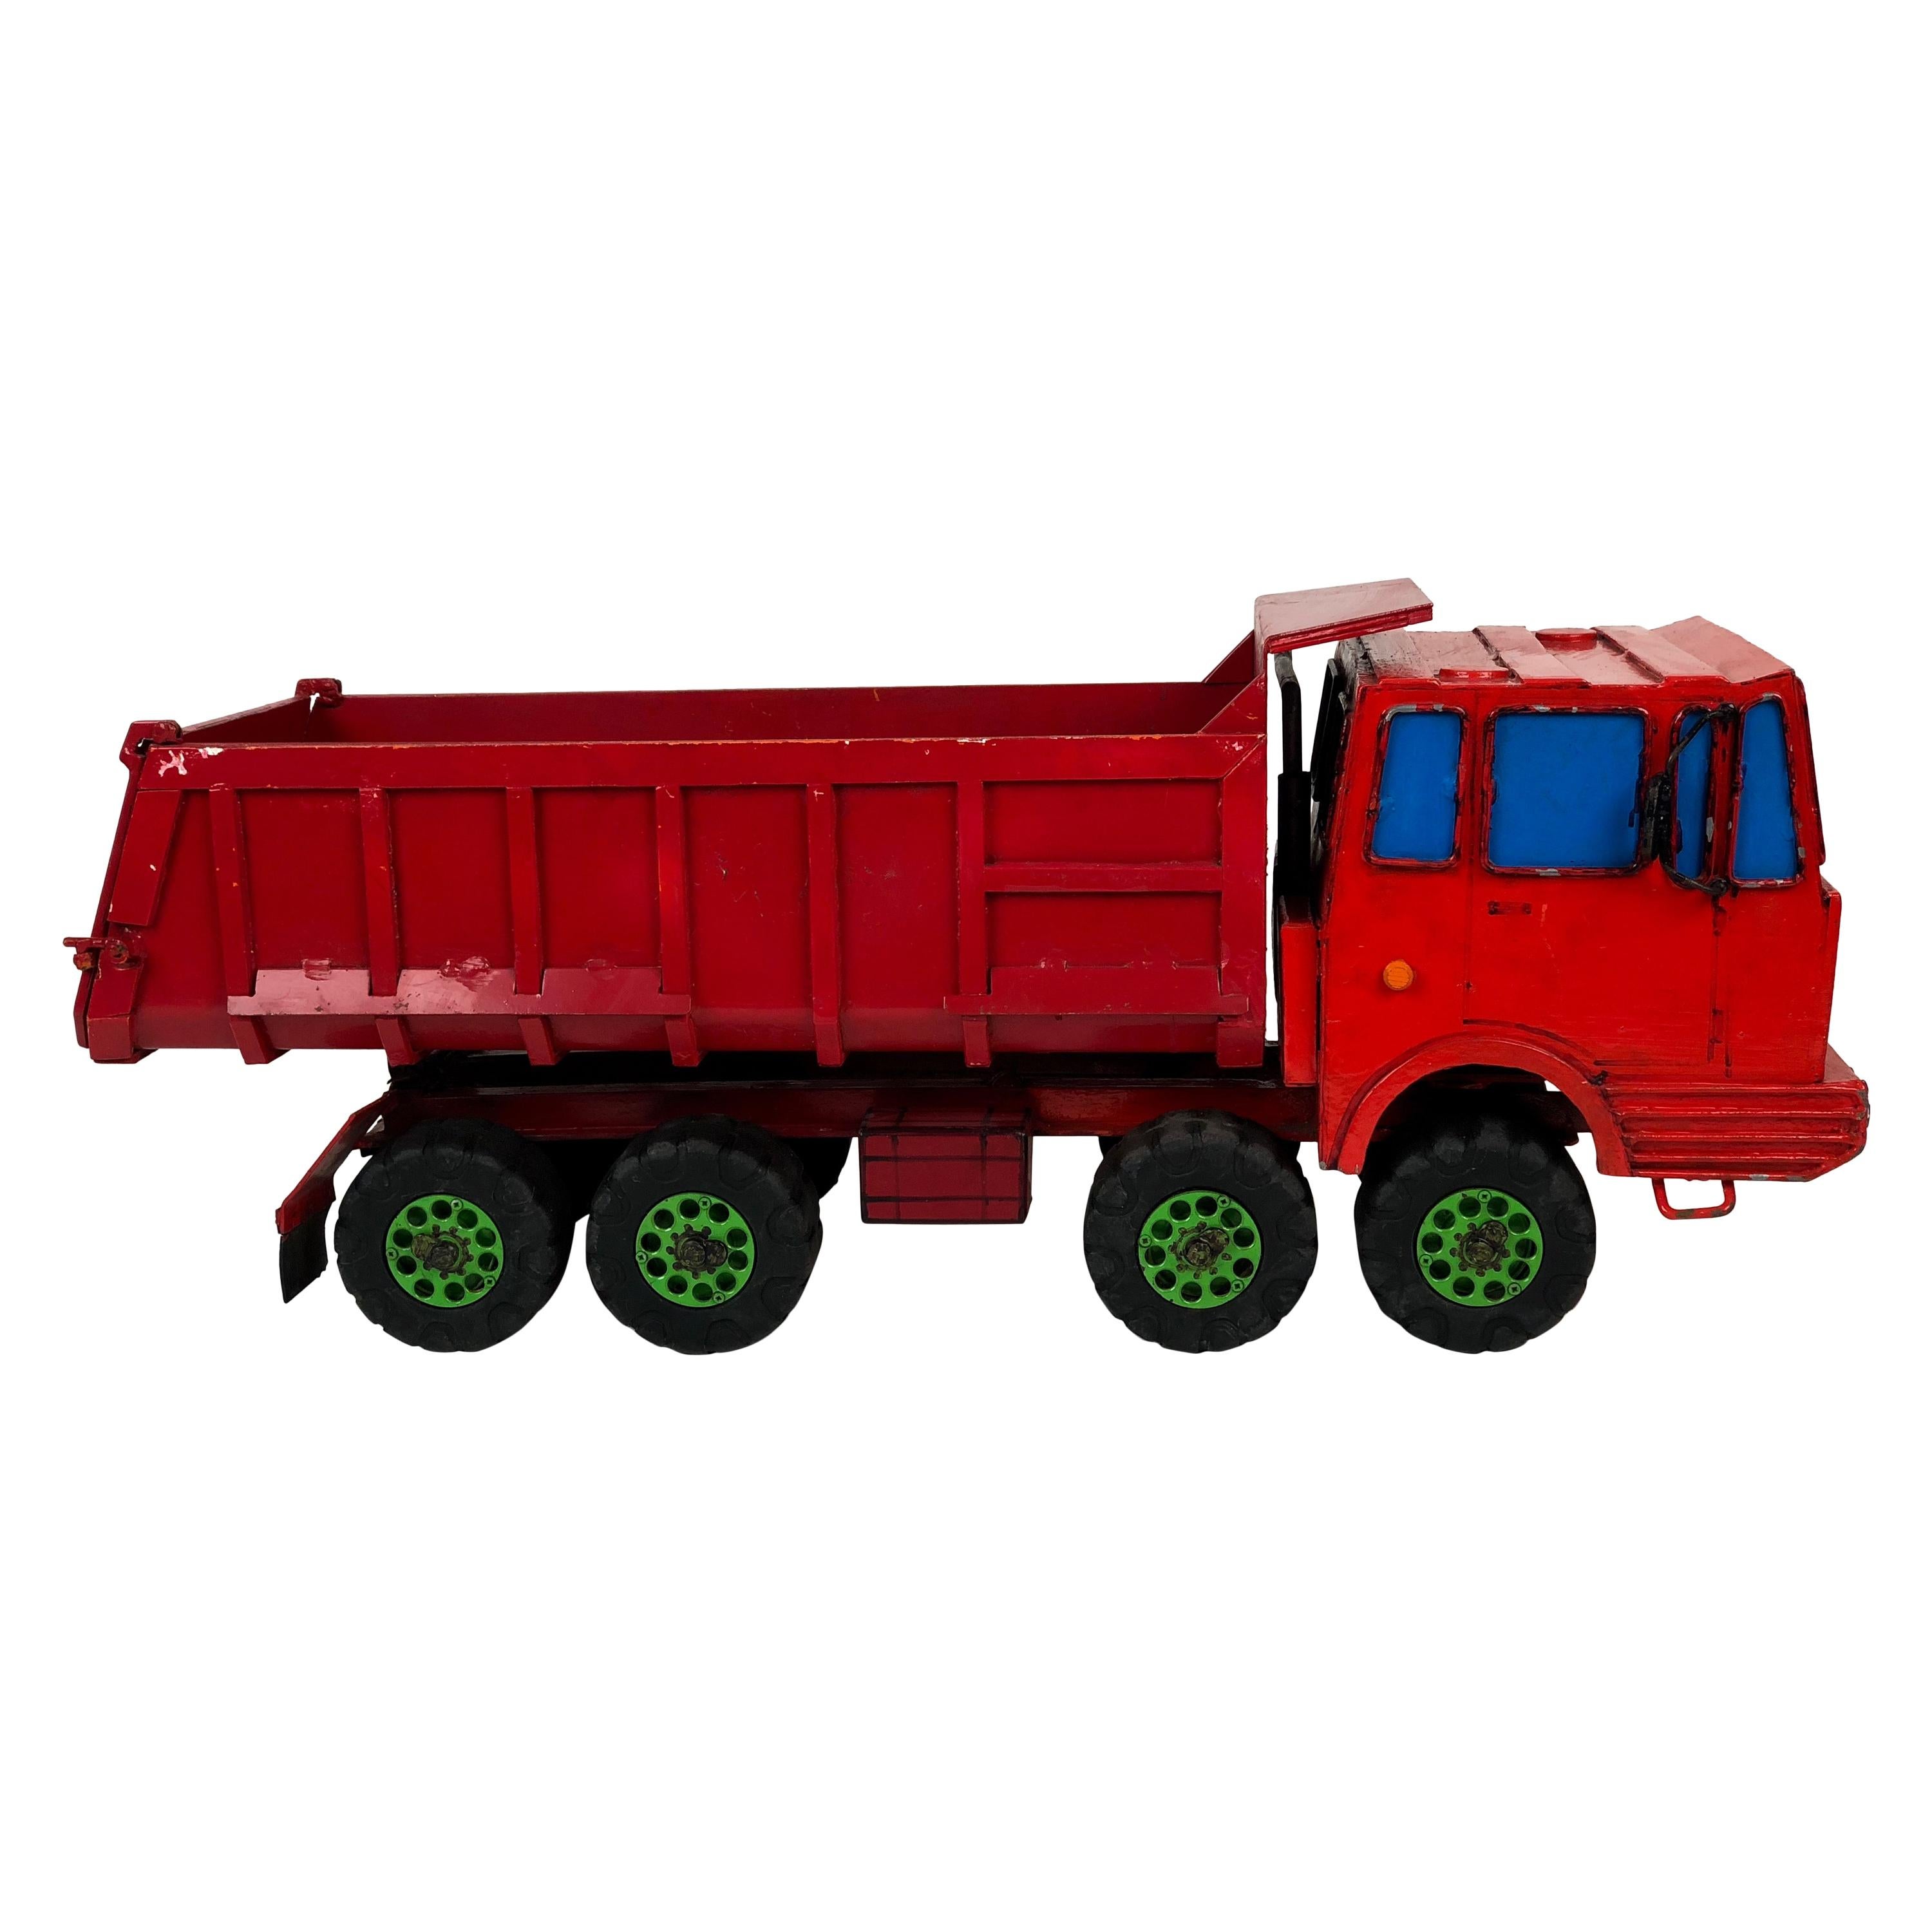 Tatra Truck Model from 1980s For Sale